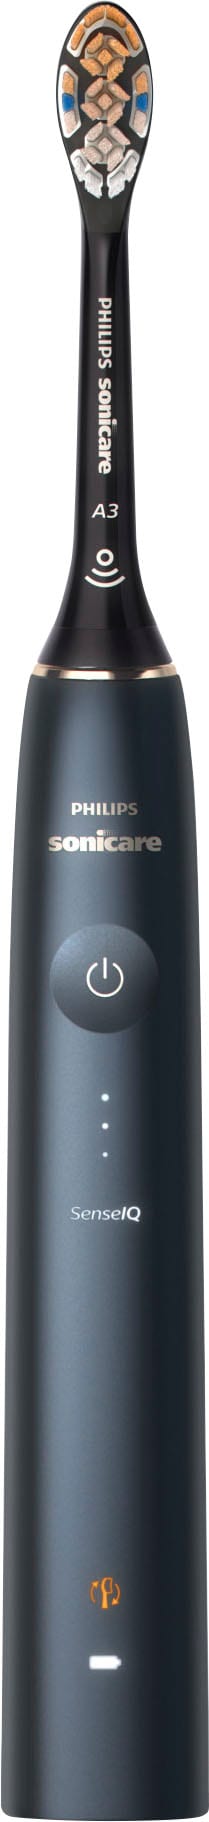 Philips Sonicare 9900 Prestige Rechargeable Electric Toothbrush with SenseIQ - Midnight_3